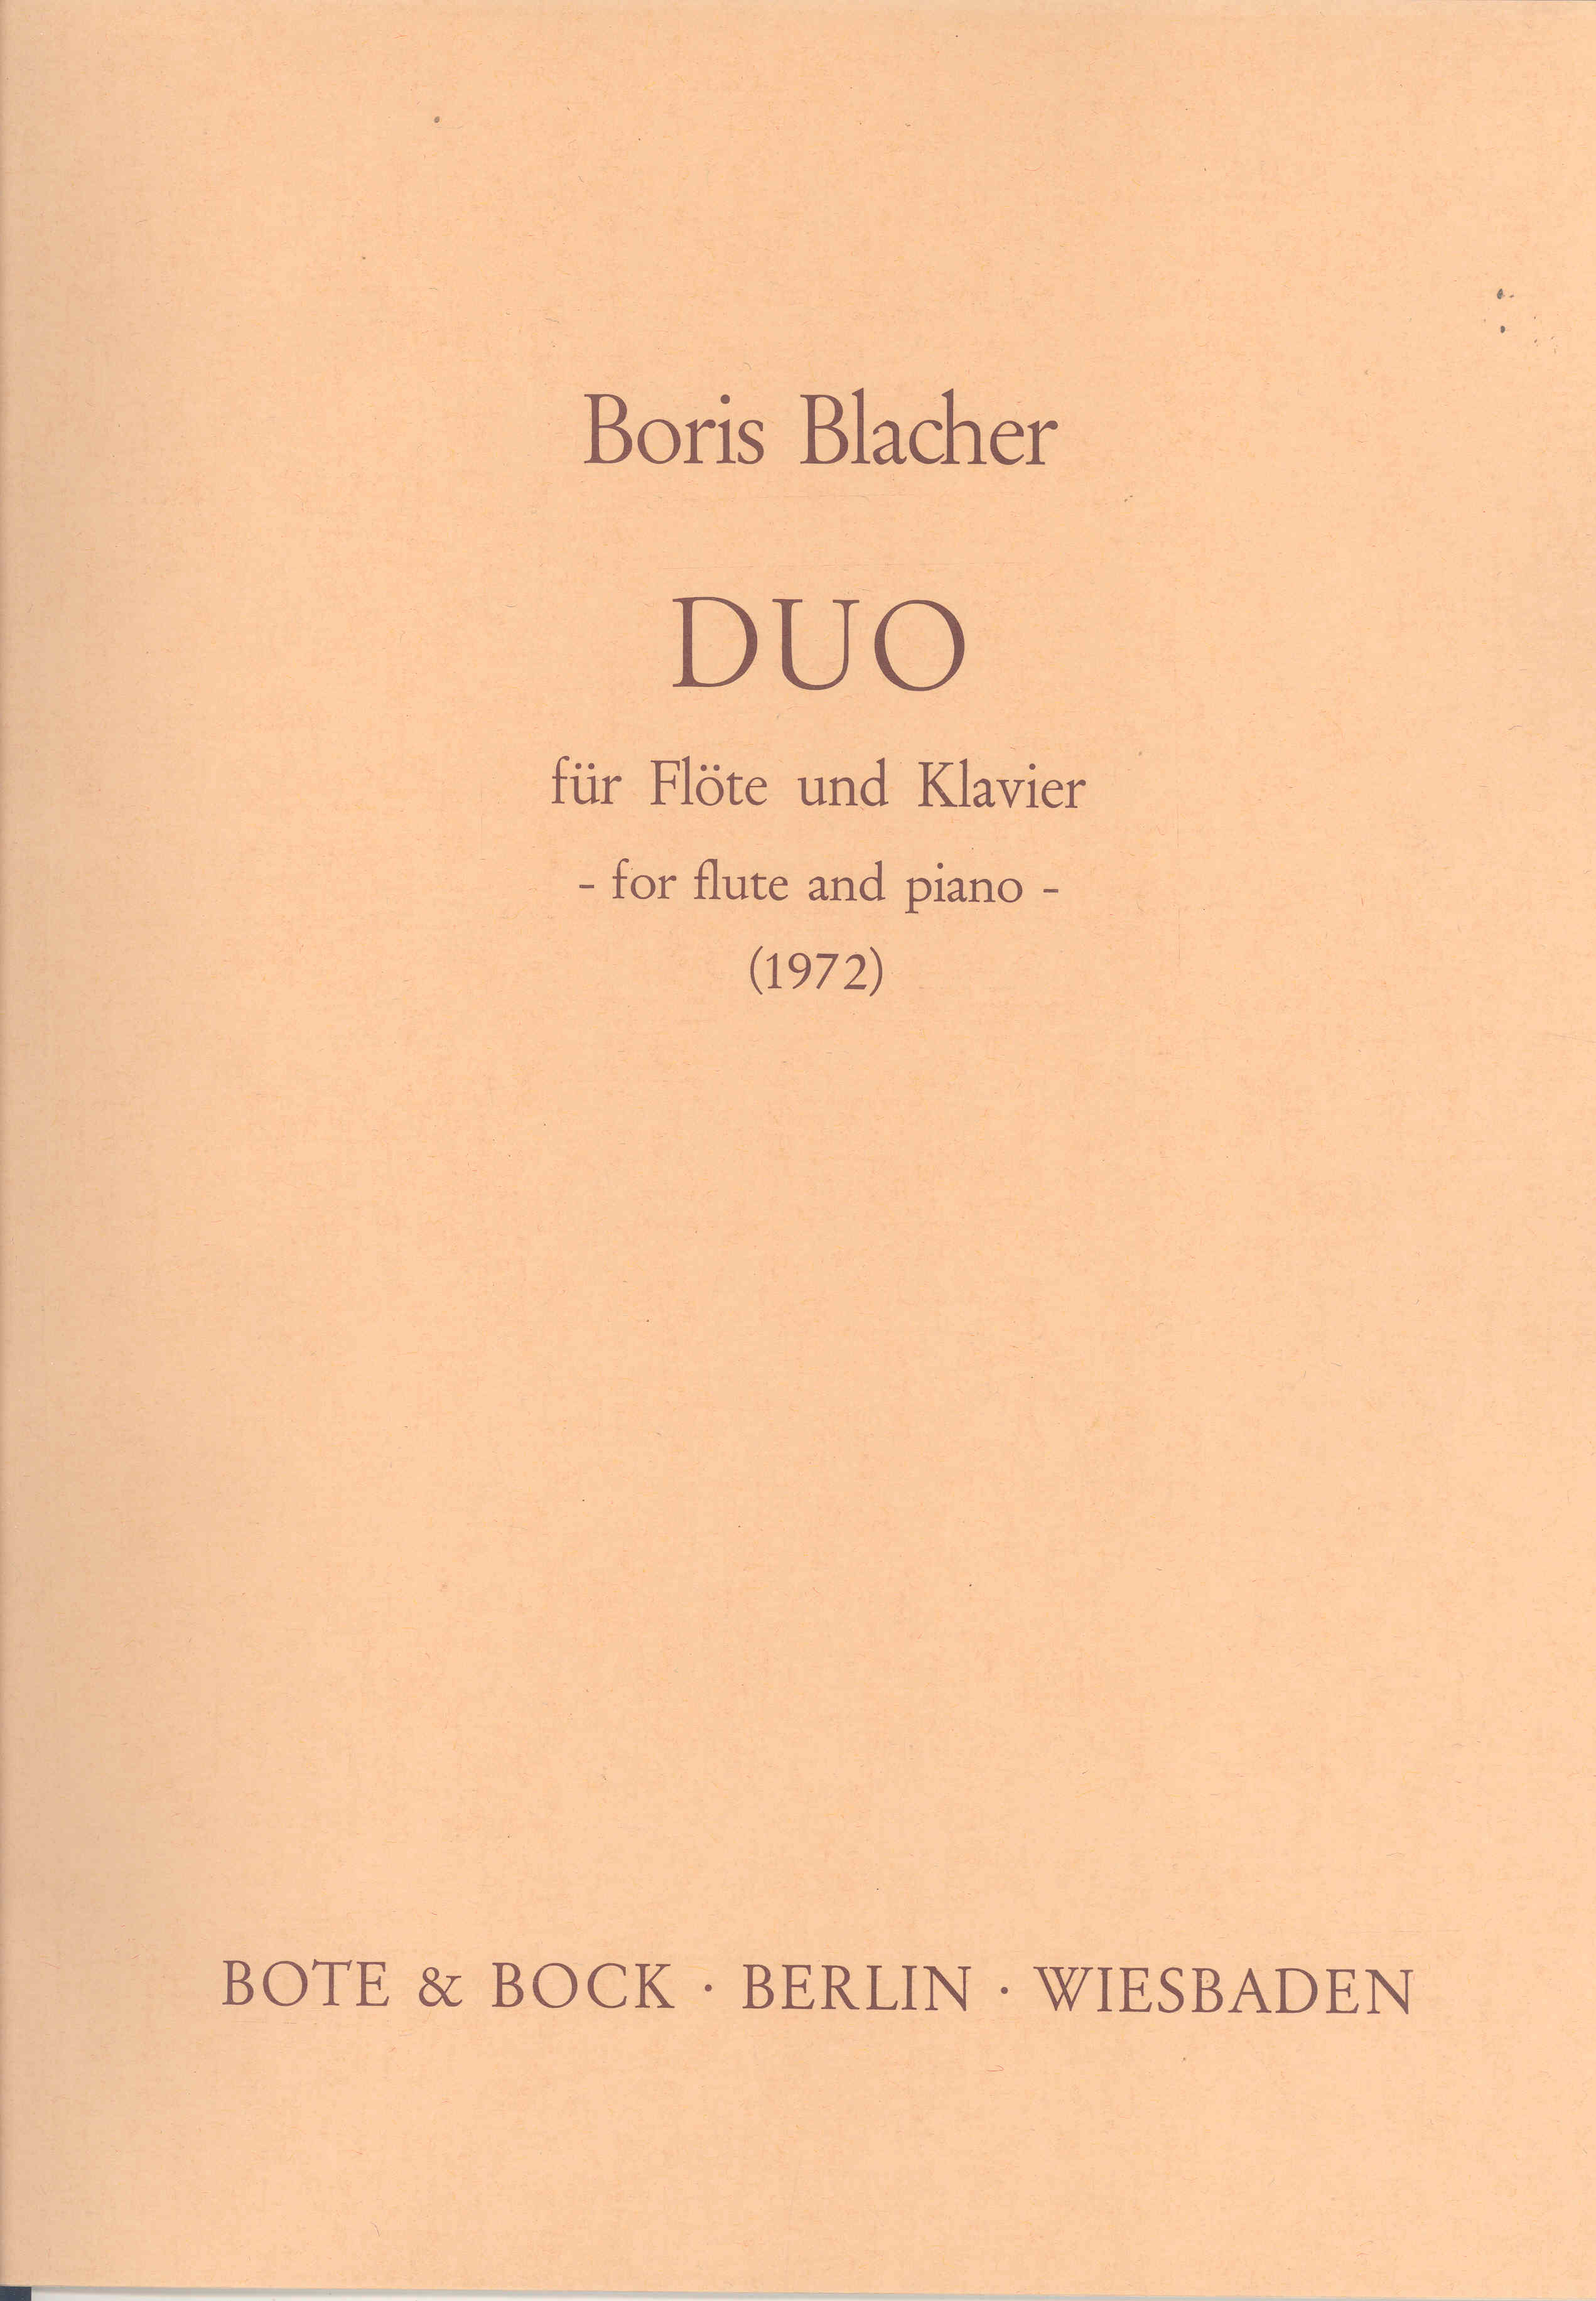 Blacher Duo For Flute And Piano (1972) Sheet Music Songbook